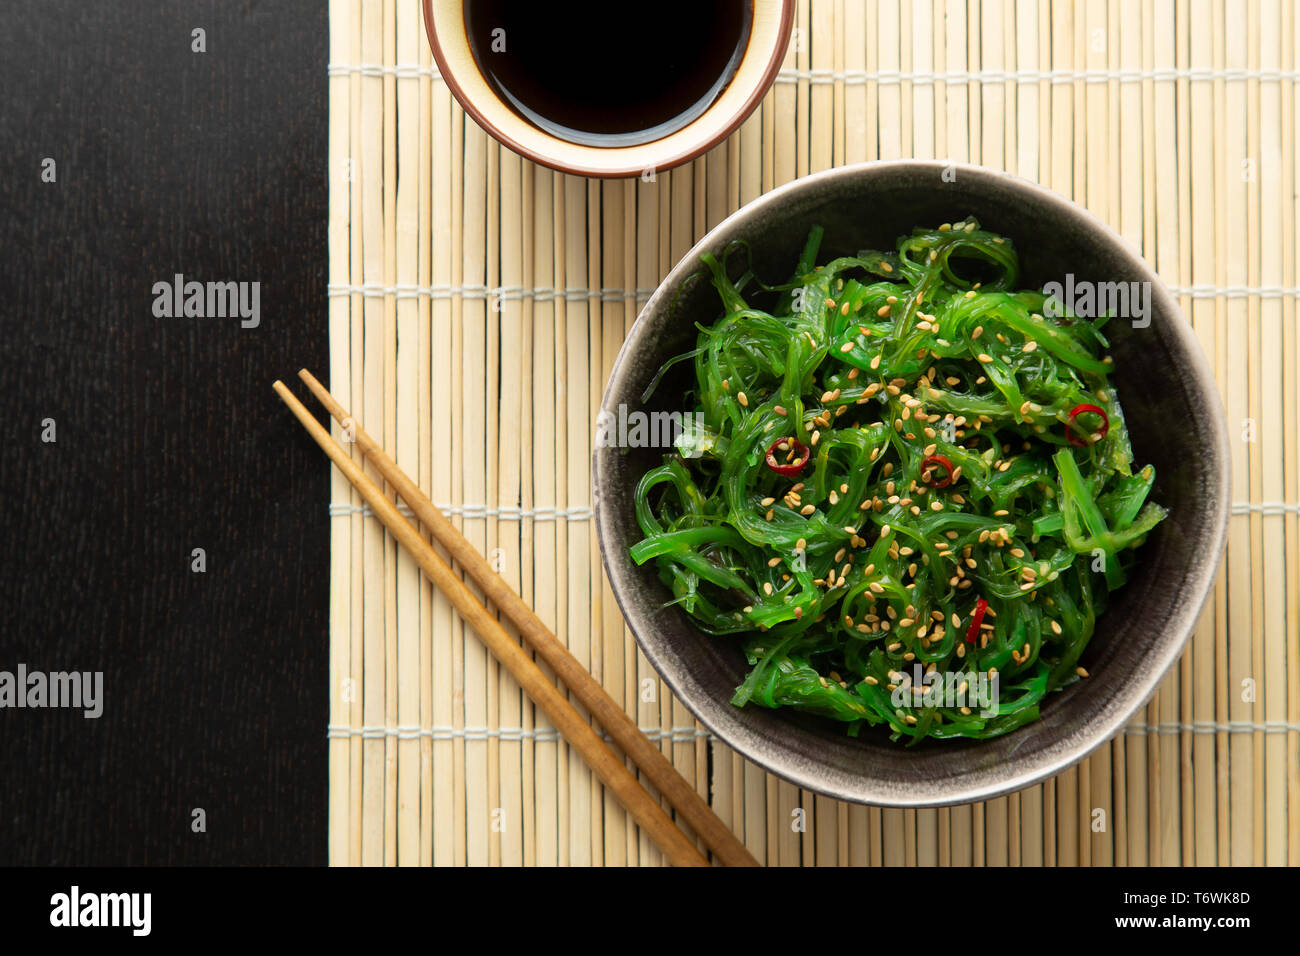 Wakame seaweed salad with sesame seeds and chili pepper in a bowl on a bamboo mat Stock Photo